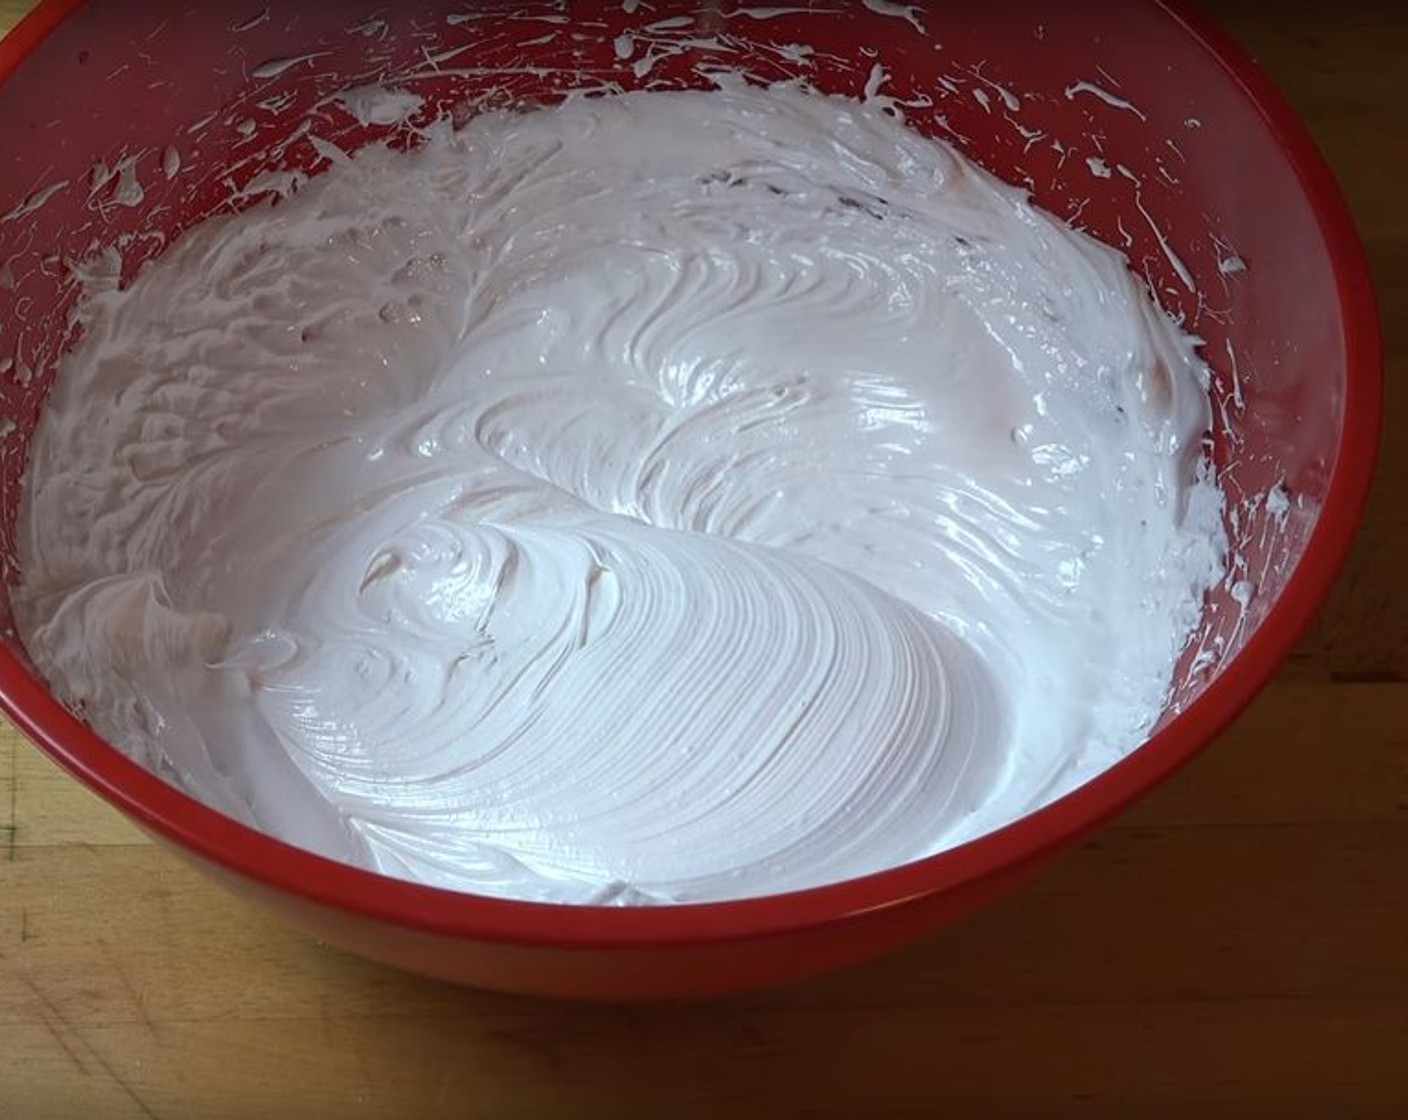 step 5 Transfer to a bowl. Add the Vanilla Extract (1 tsp) then Food Coloring (to taste), if desired, and then beat for 10 minutes or until the mixture becomes thick and voluminous.